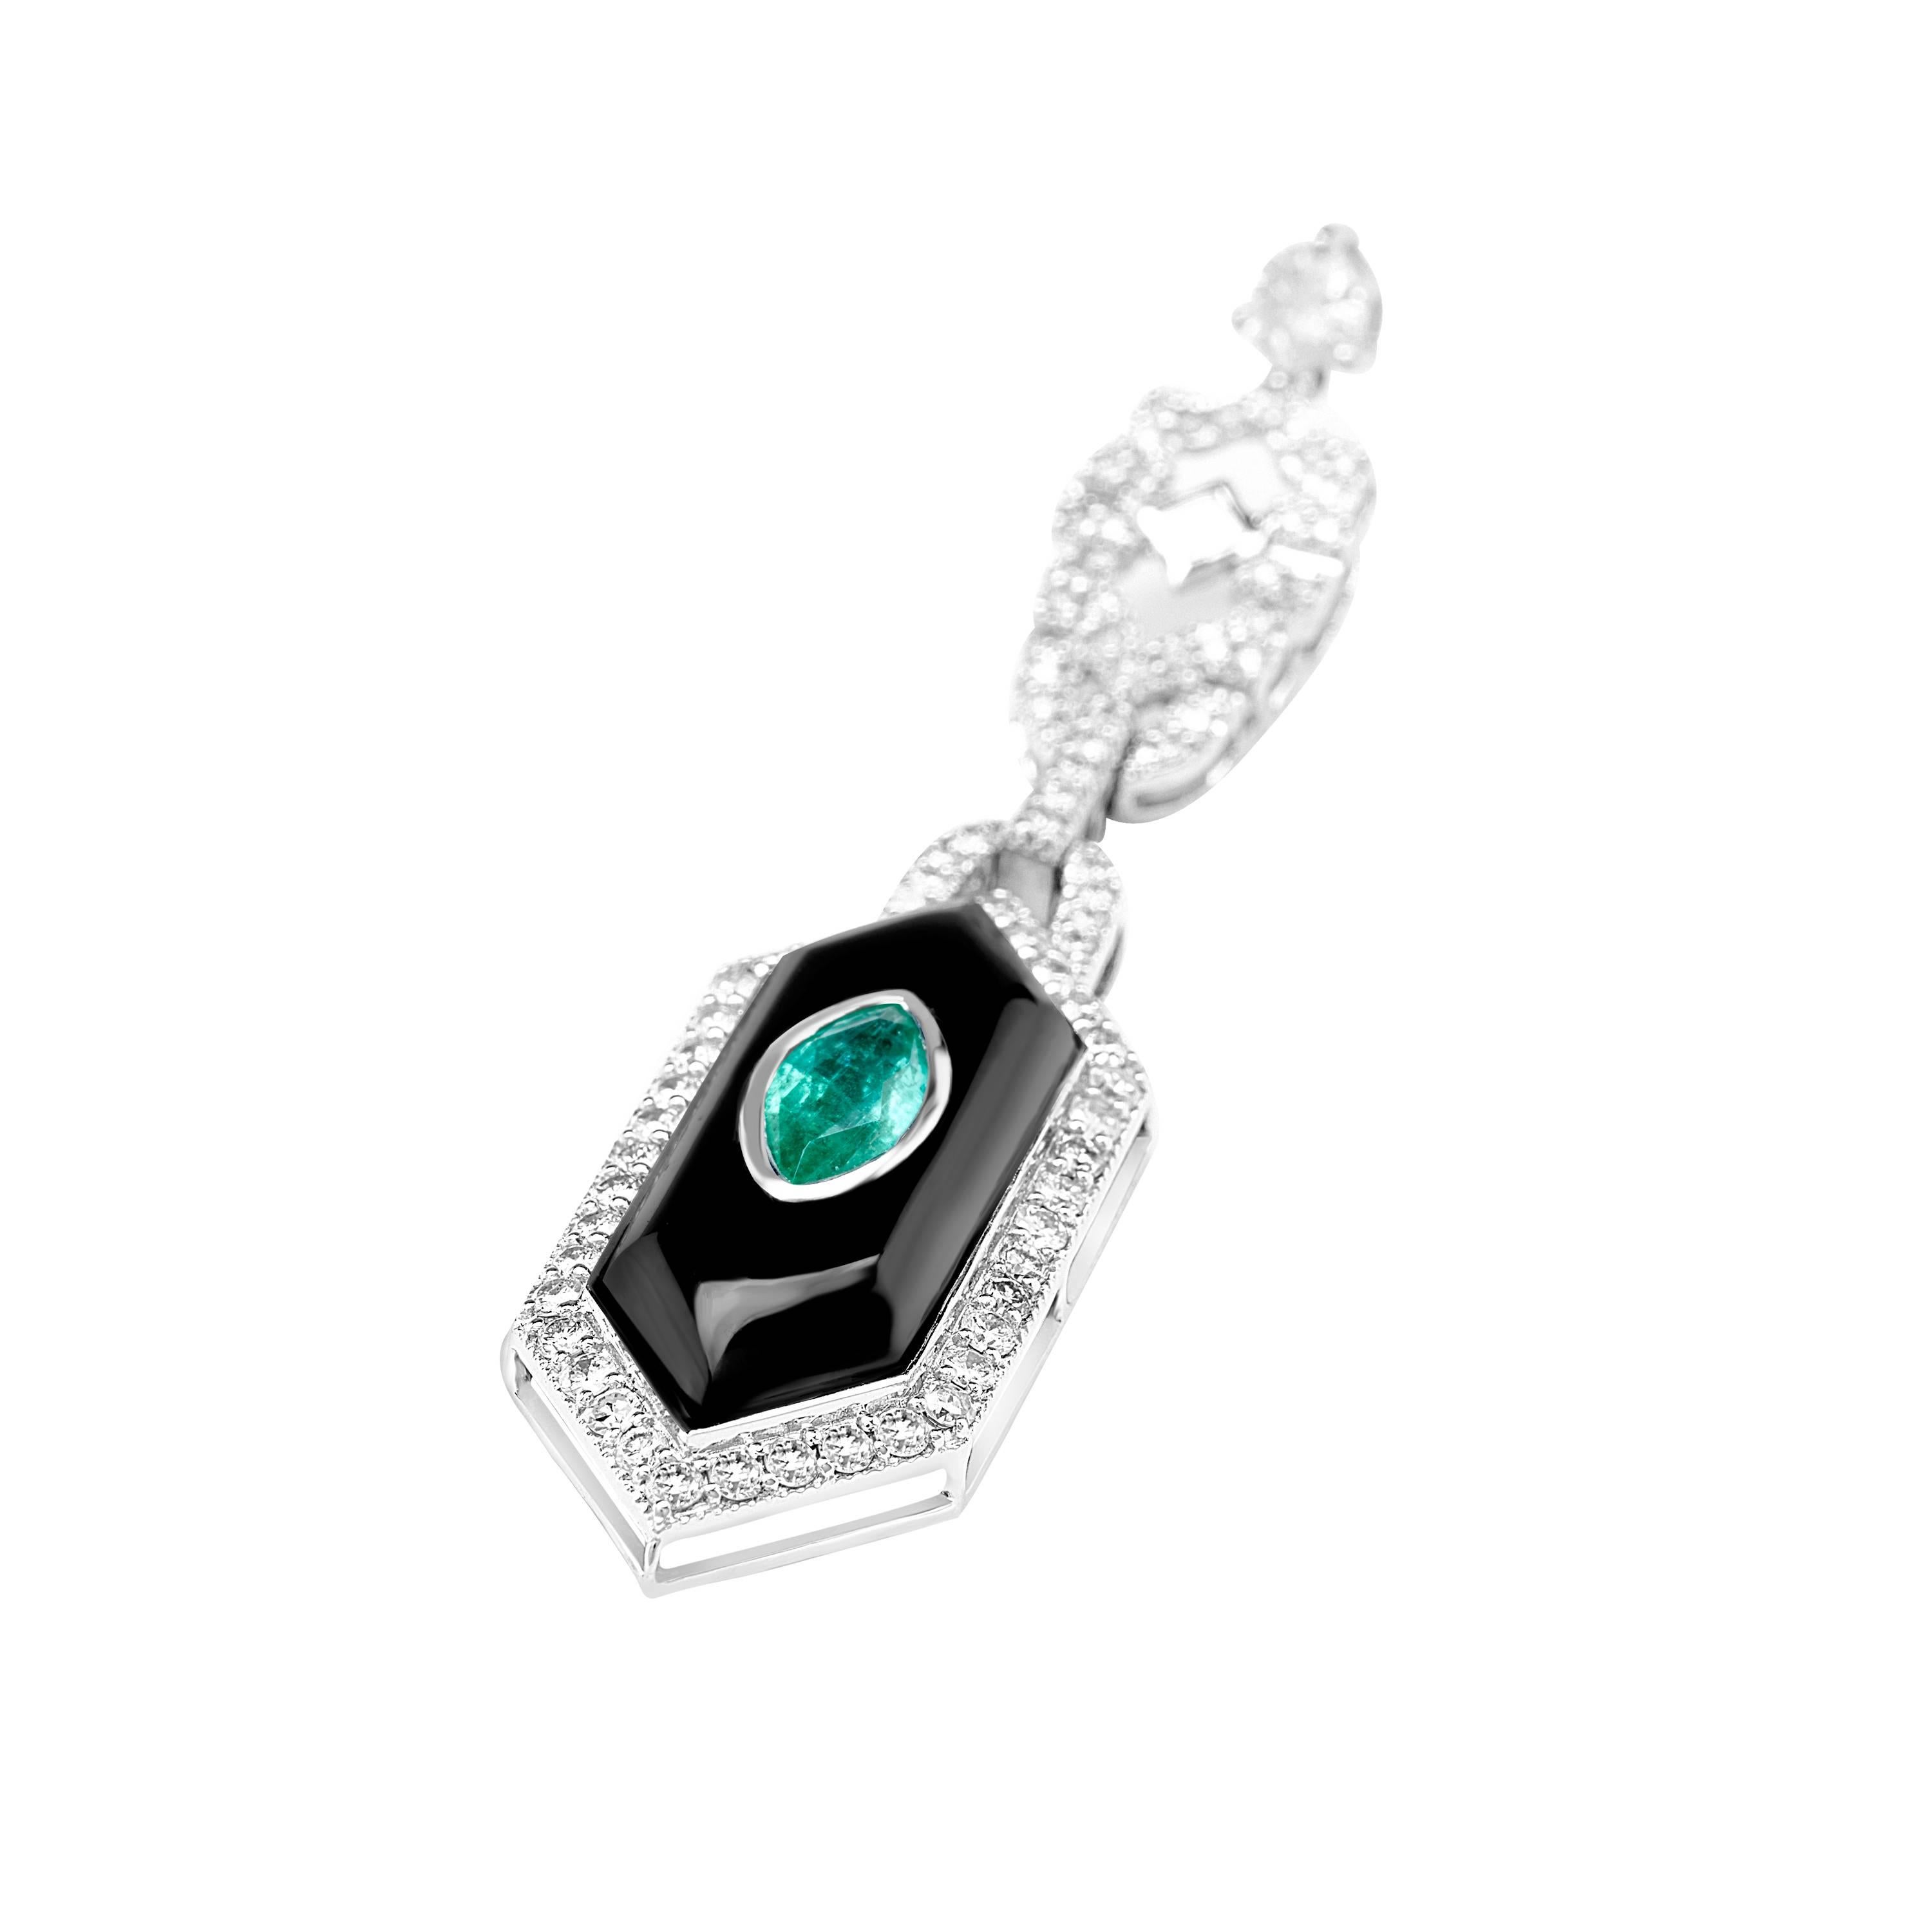 These pair of Diamond,Emerald And onyx Earrings Are a Must have.
They are elegant and classy. The  Marquise emerald cut emeralds are bezel set surrounded by onyx and diamonds which makes them stunning. When you see these it will be love at first